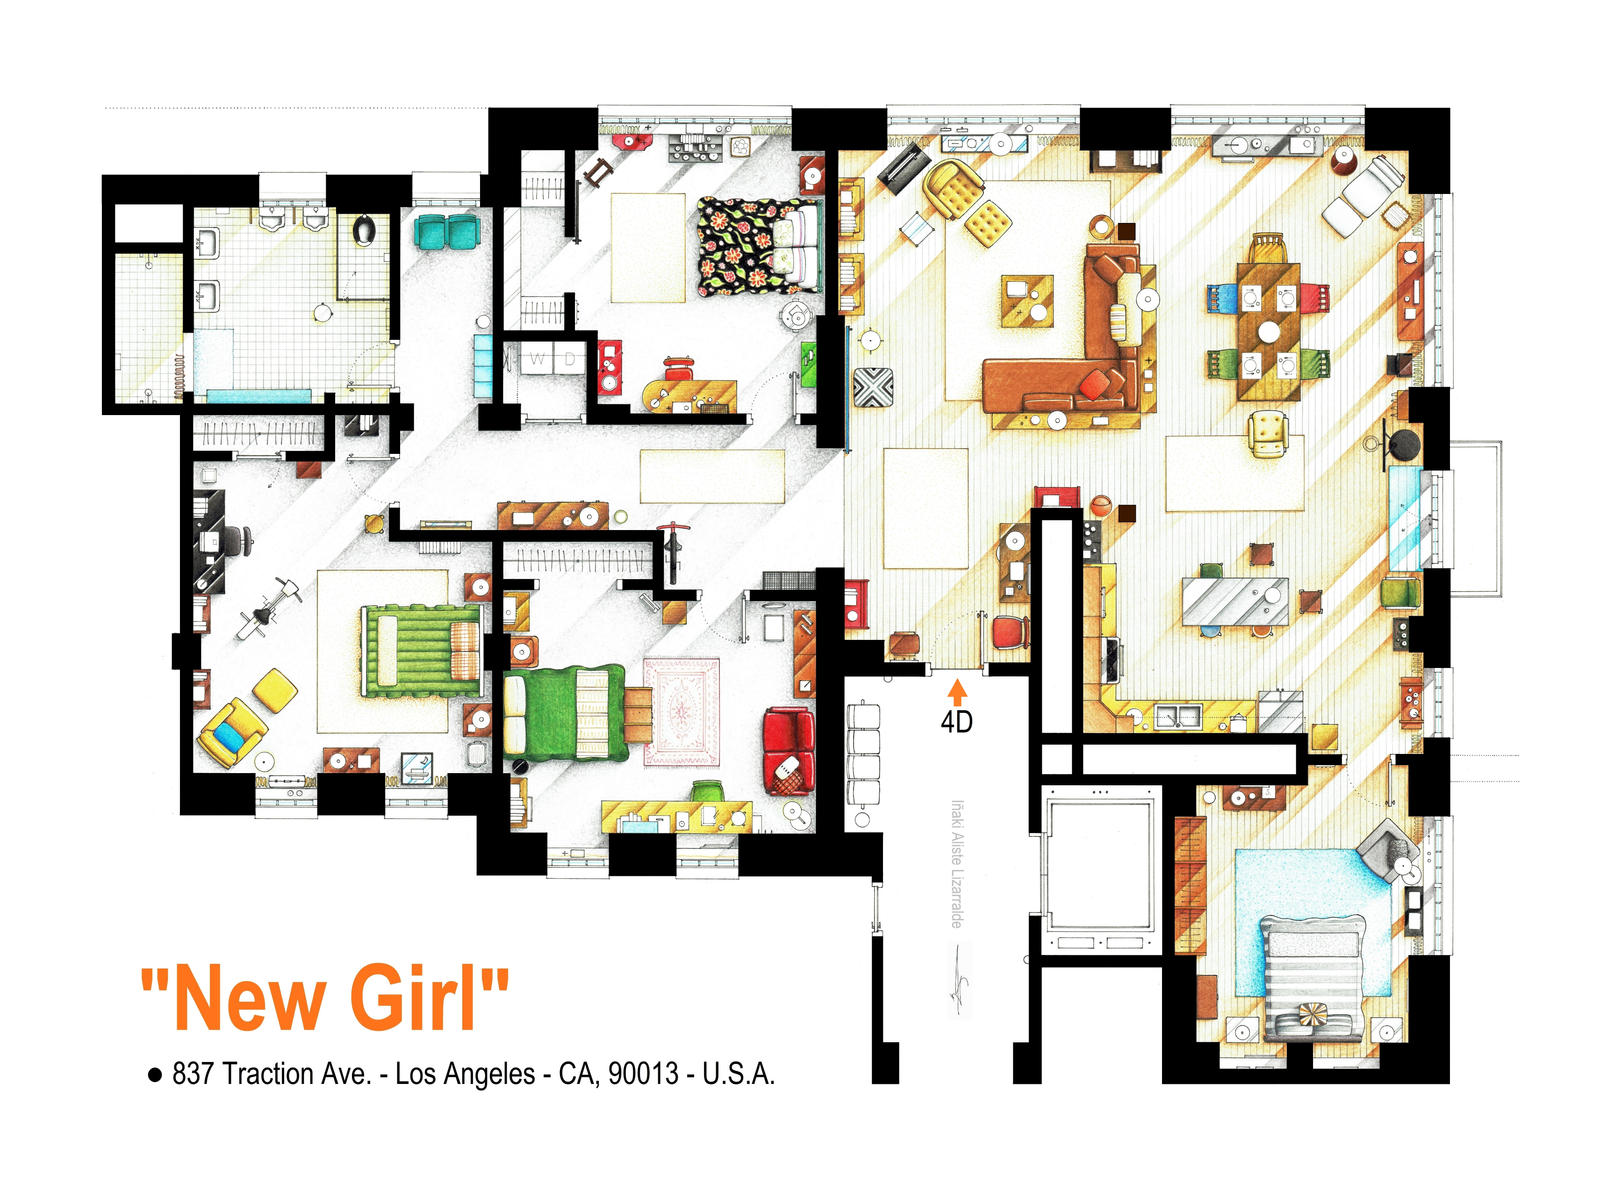 Floorplan Of The Loft Apartment From New Girl By Nikneuk On